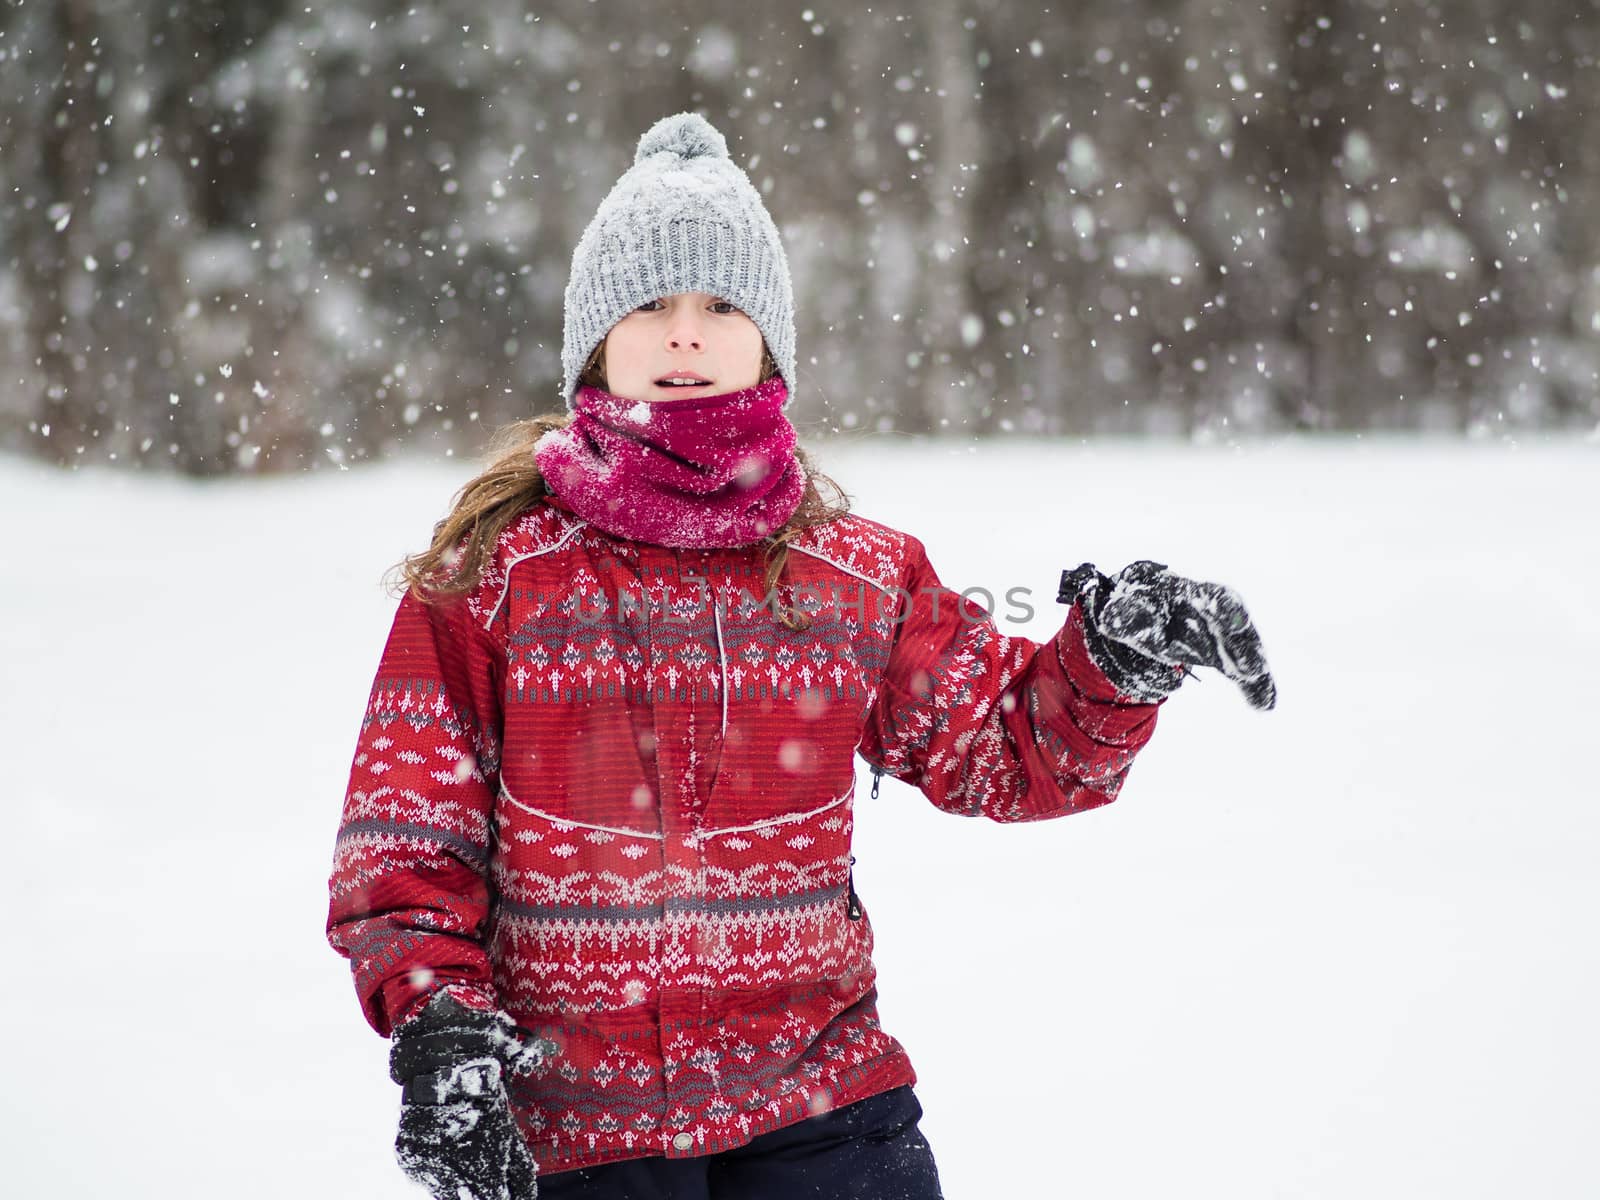 Cute young girl walking in a snow storm